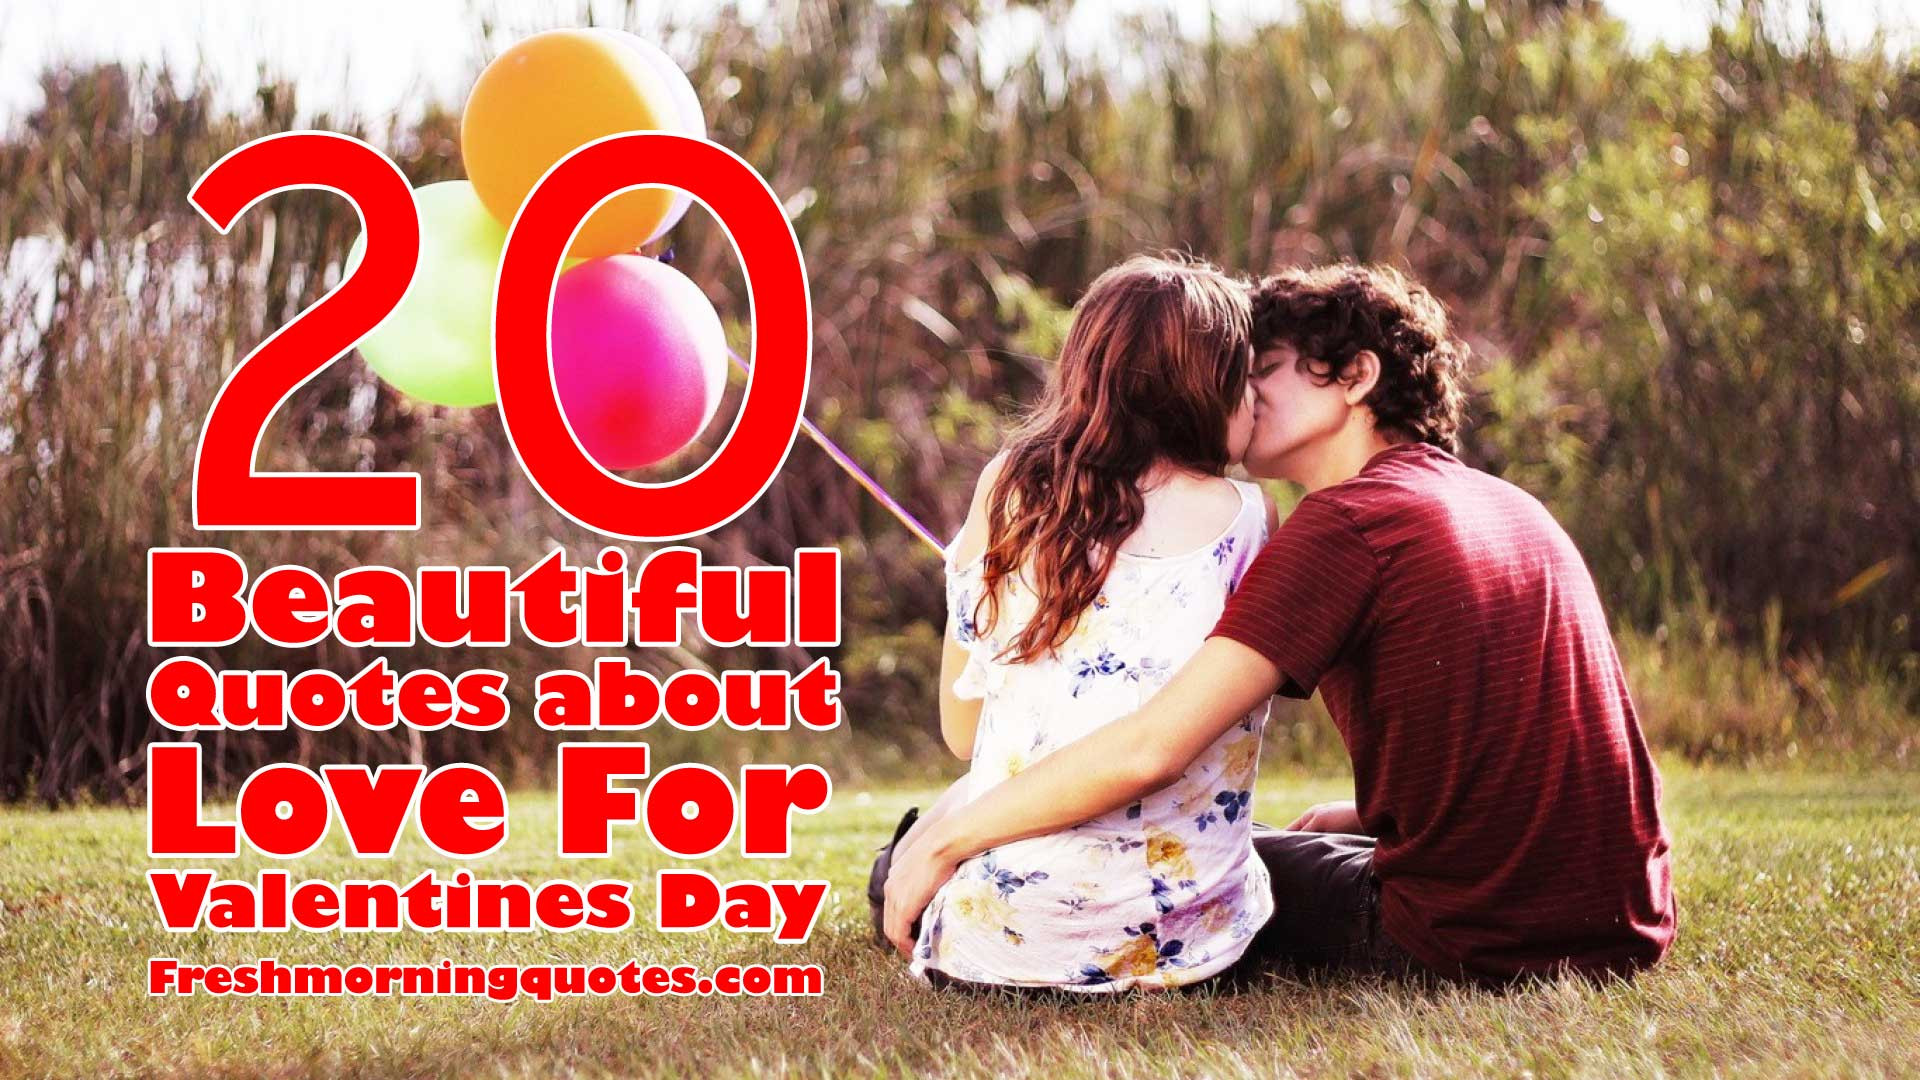 Valentines Day Quote
 20 Beautiful Quotes about Love for Valentines Day